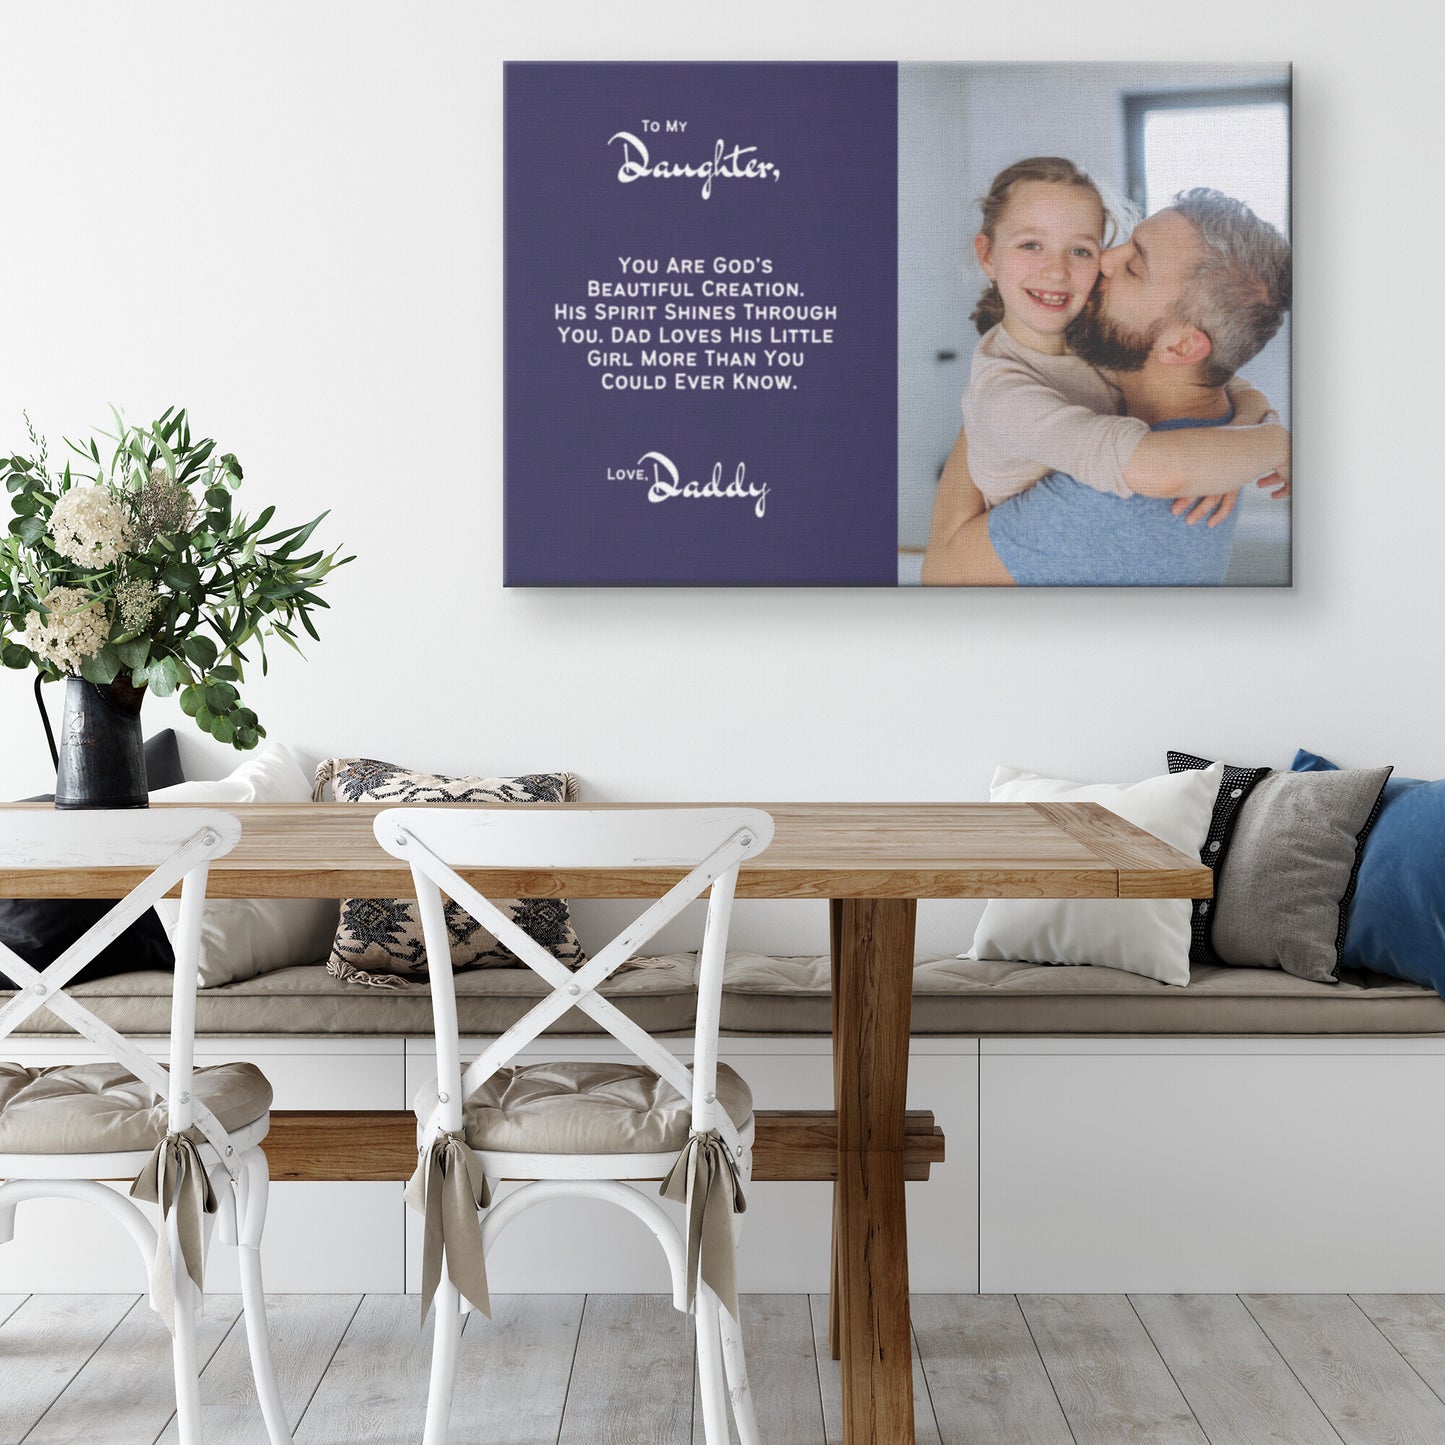 Personalized Daddy/Daughter, God's Beautiful Creation Canvas Wall Art